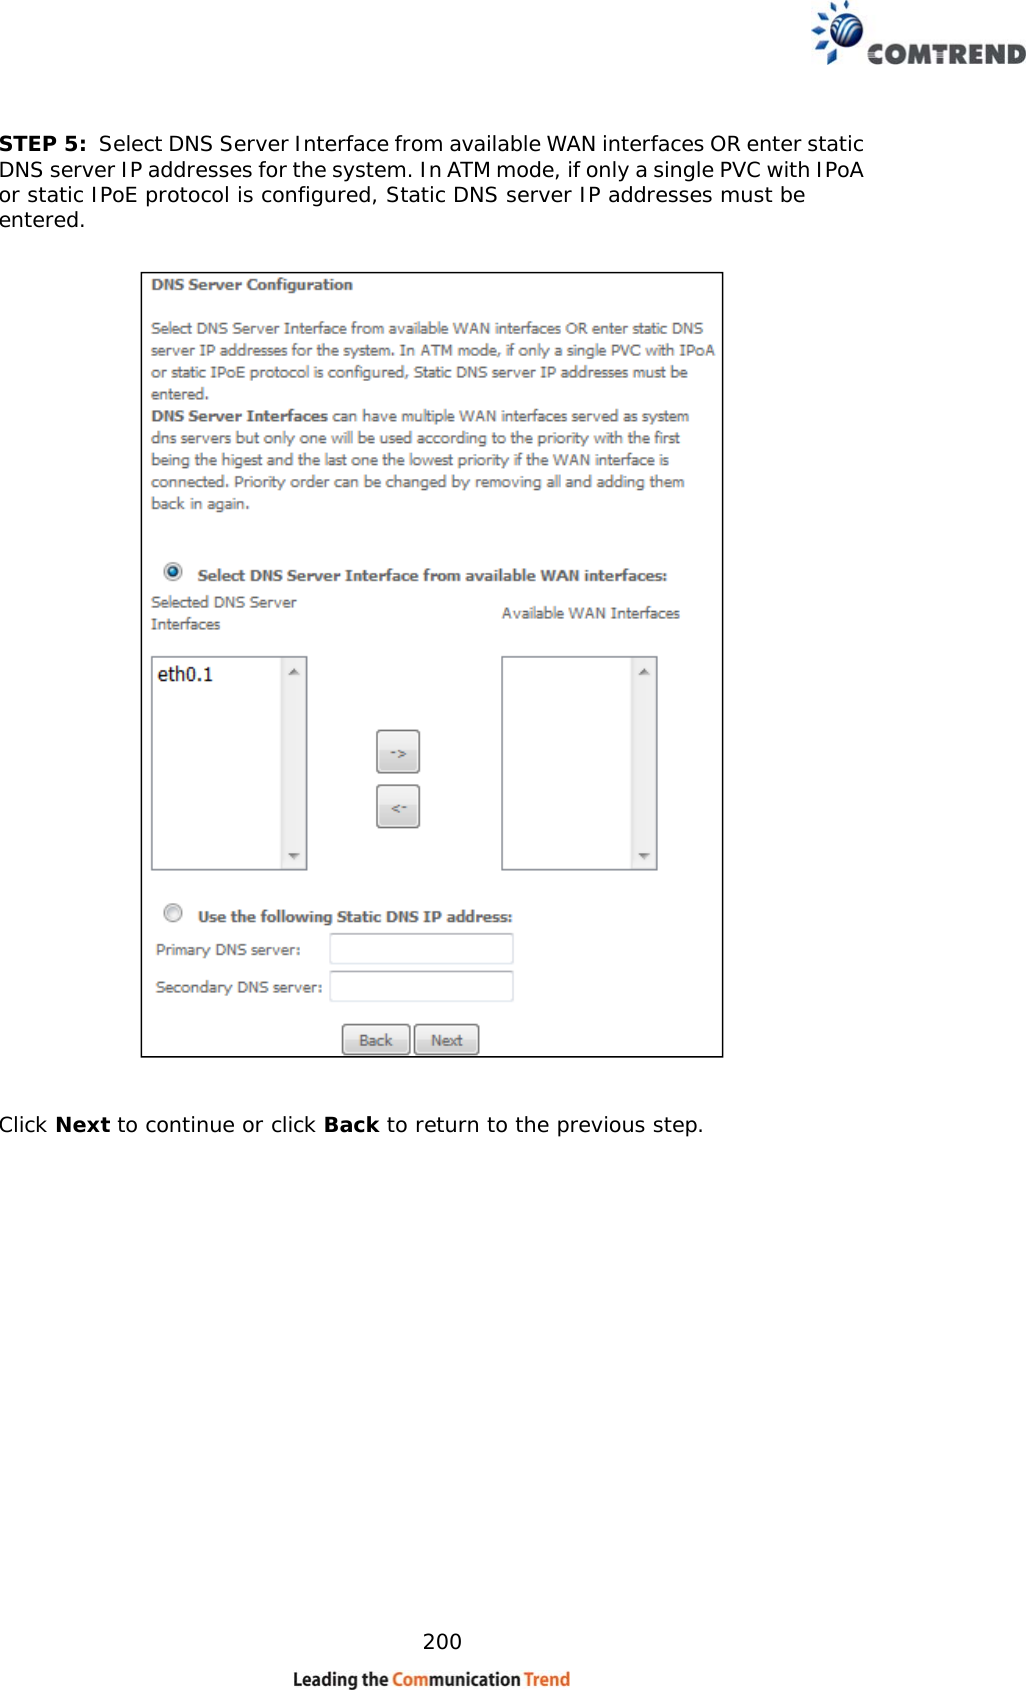    200 STEP 5:  Select DNS Server Interface from available WAN interfaces OR enter static DNS server IP addresses for the system. In ATM mode, if only a single PVC with IPoA or static IPoE protocol is configured, Static DNS server IP addresses must be entered.      Click Next to continue or click Back to return to the previous step.     